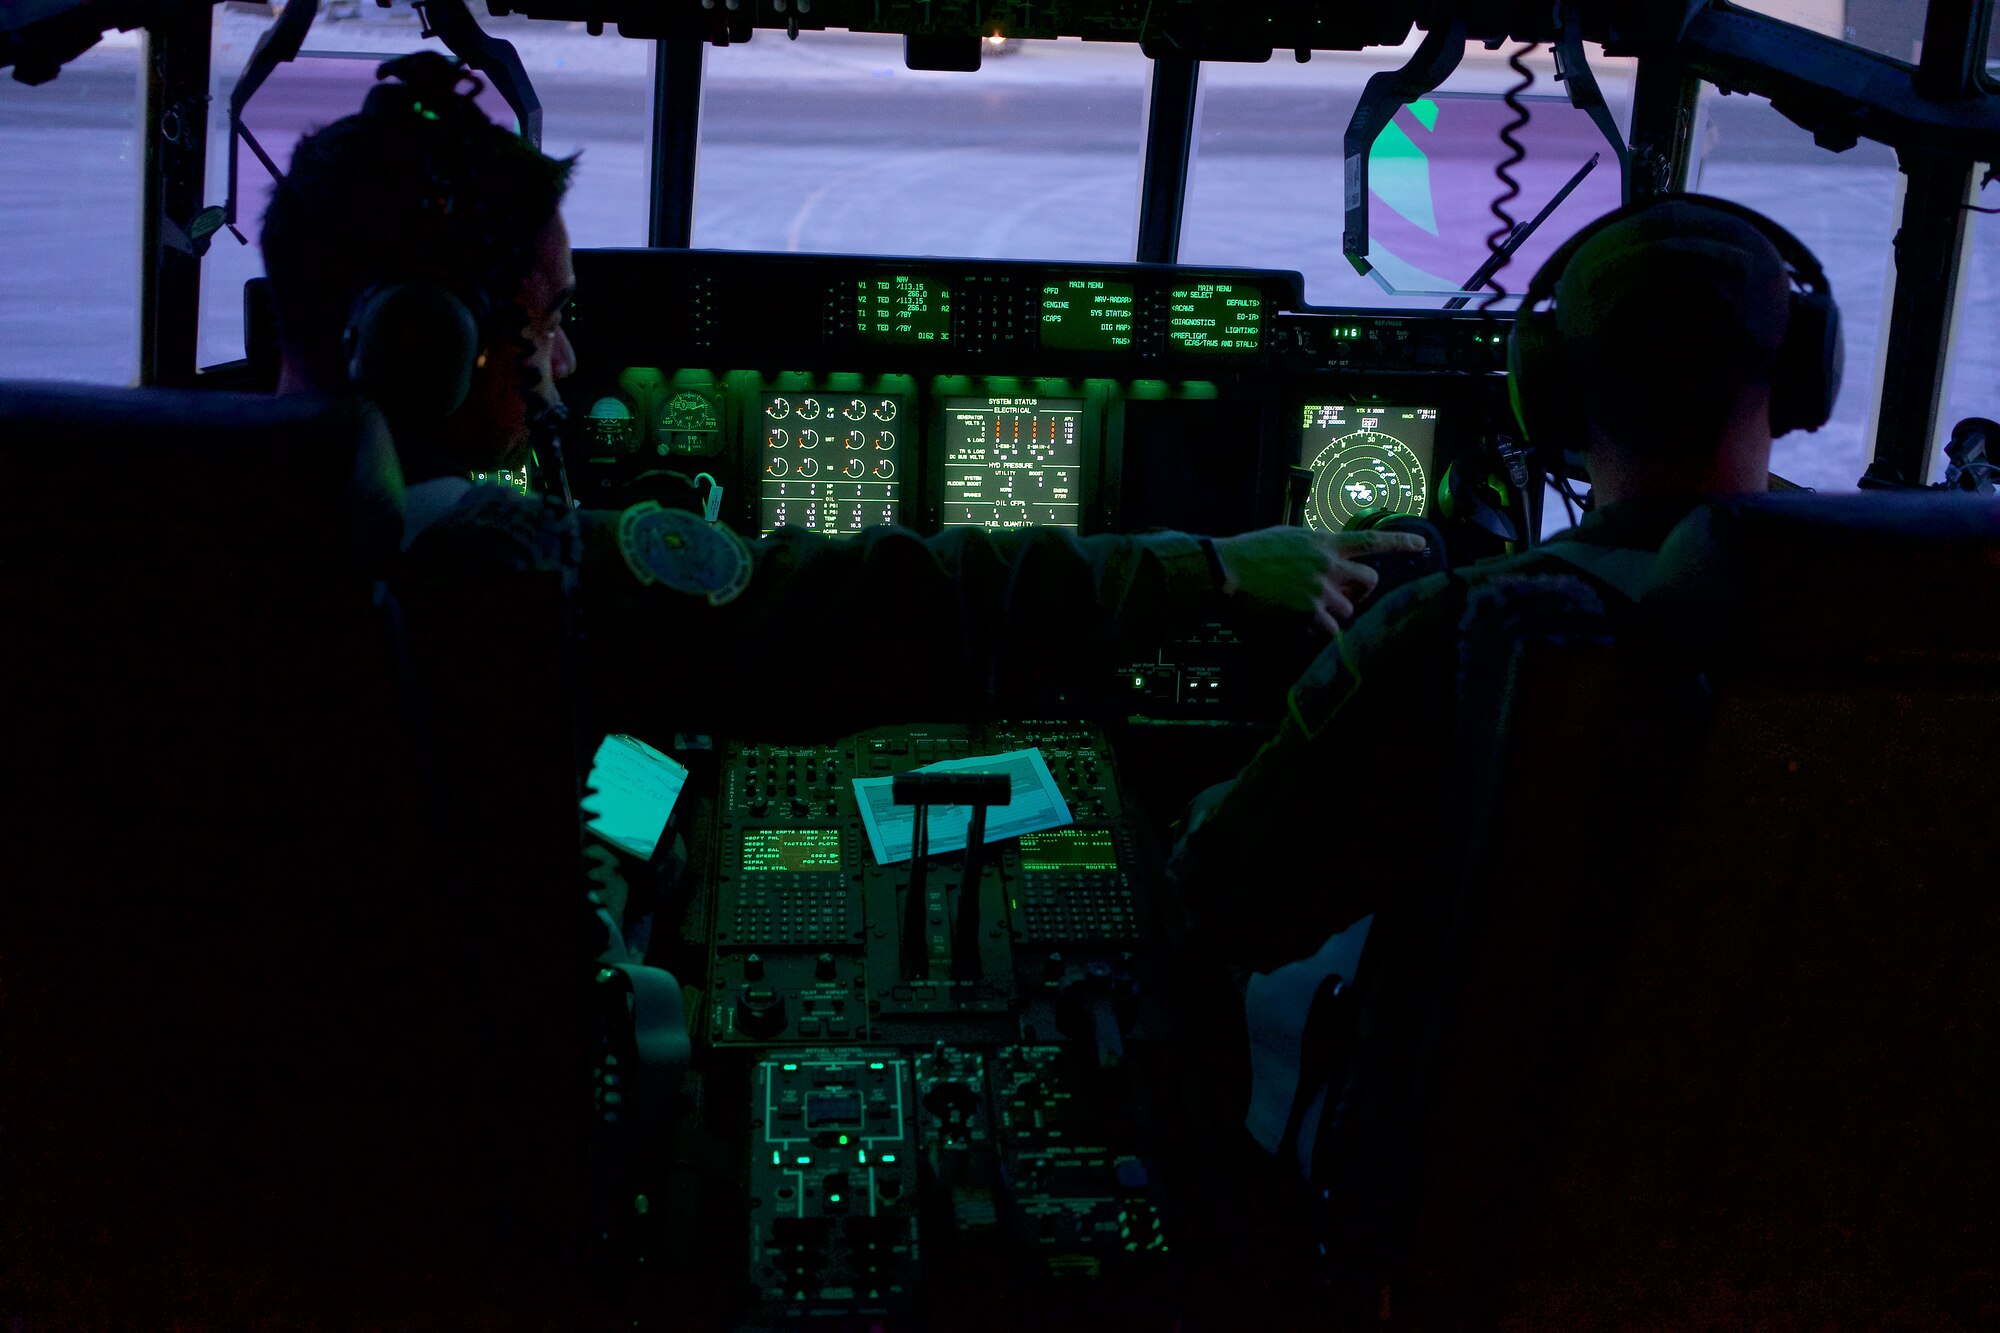 Alaska Air National Guard Lt. Col. Eric Budd, 211th Rescue Squadron commander, and Capt. Christopher Brunner, 211th RQS HC-130J Combat King II pilot, conduct pre-flight procedures Nov. 6, 2018, at Joint Base Elmendorf-Richardson, Alaska, before transporting prescription drugs to Spokane, Washington, for incineration. Airmen of 176th Wing, members of the Alaska National Guard Counterdrug Support Program, and special agents of the Drug Enforcement Administration joined forces in the effort of transporting more than 4,000 pounds of prescription drugs turned in during Alaska’s biannual prescription drug take back. (U.S. Air National Guard photo by David Bedard/Released)